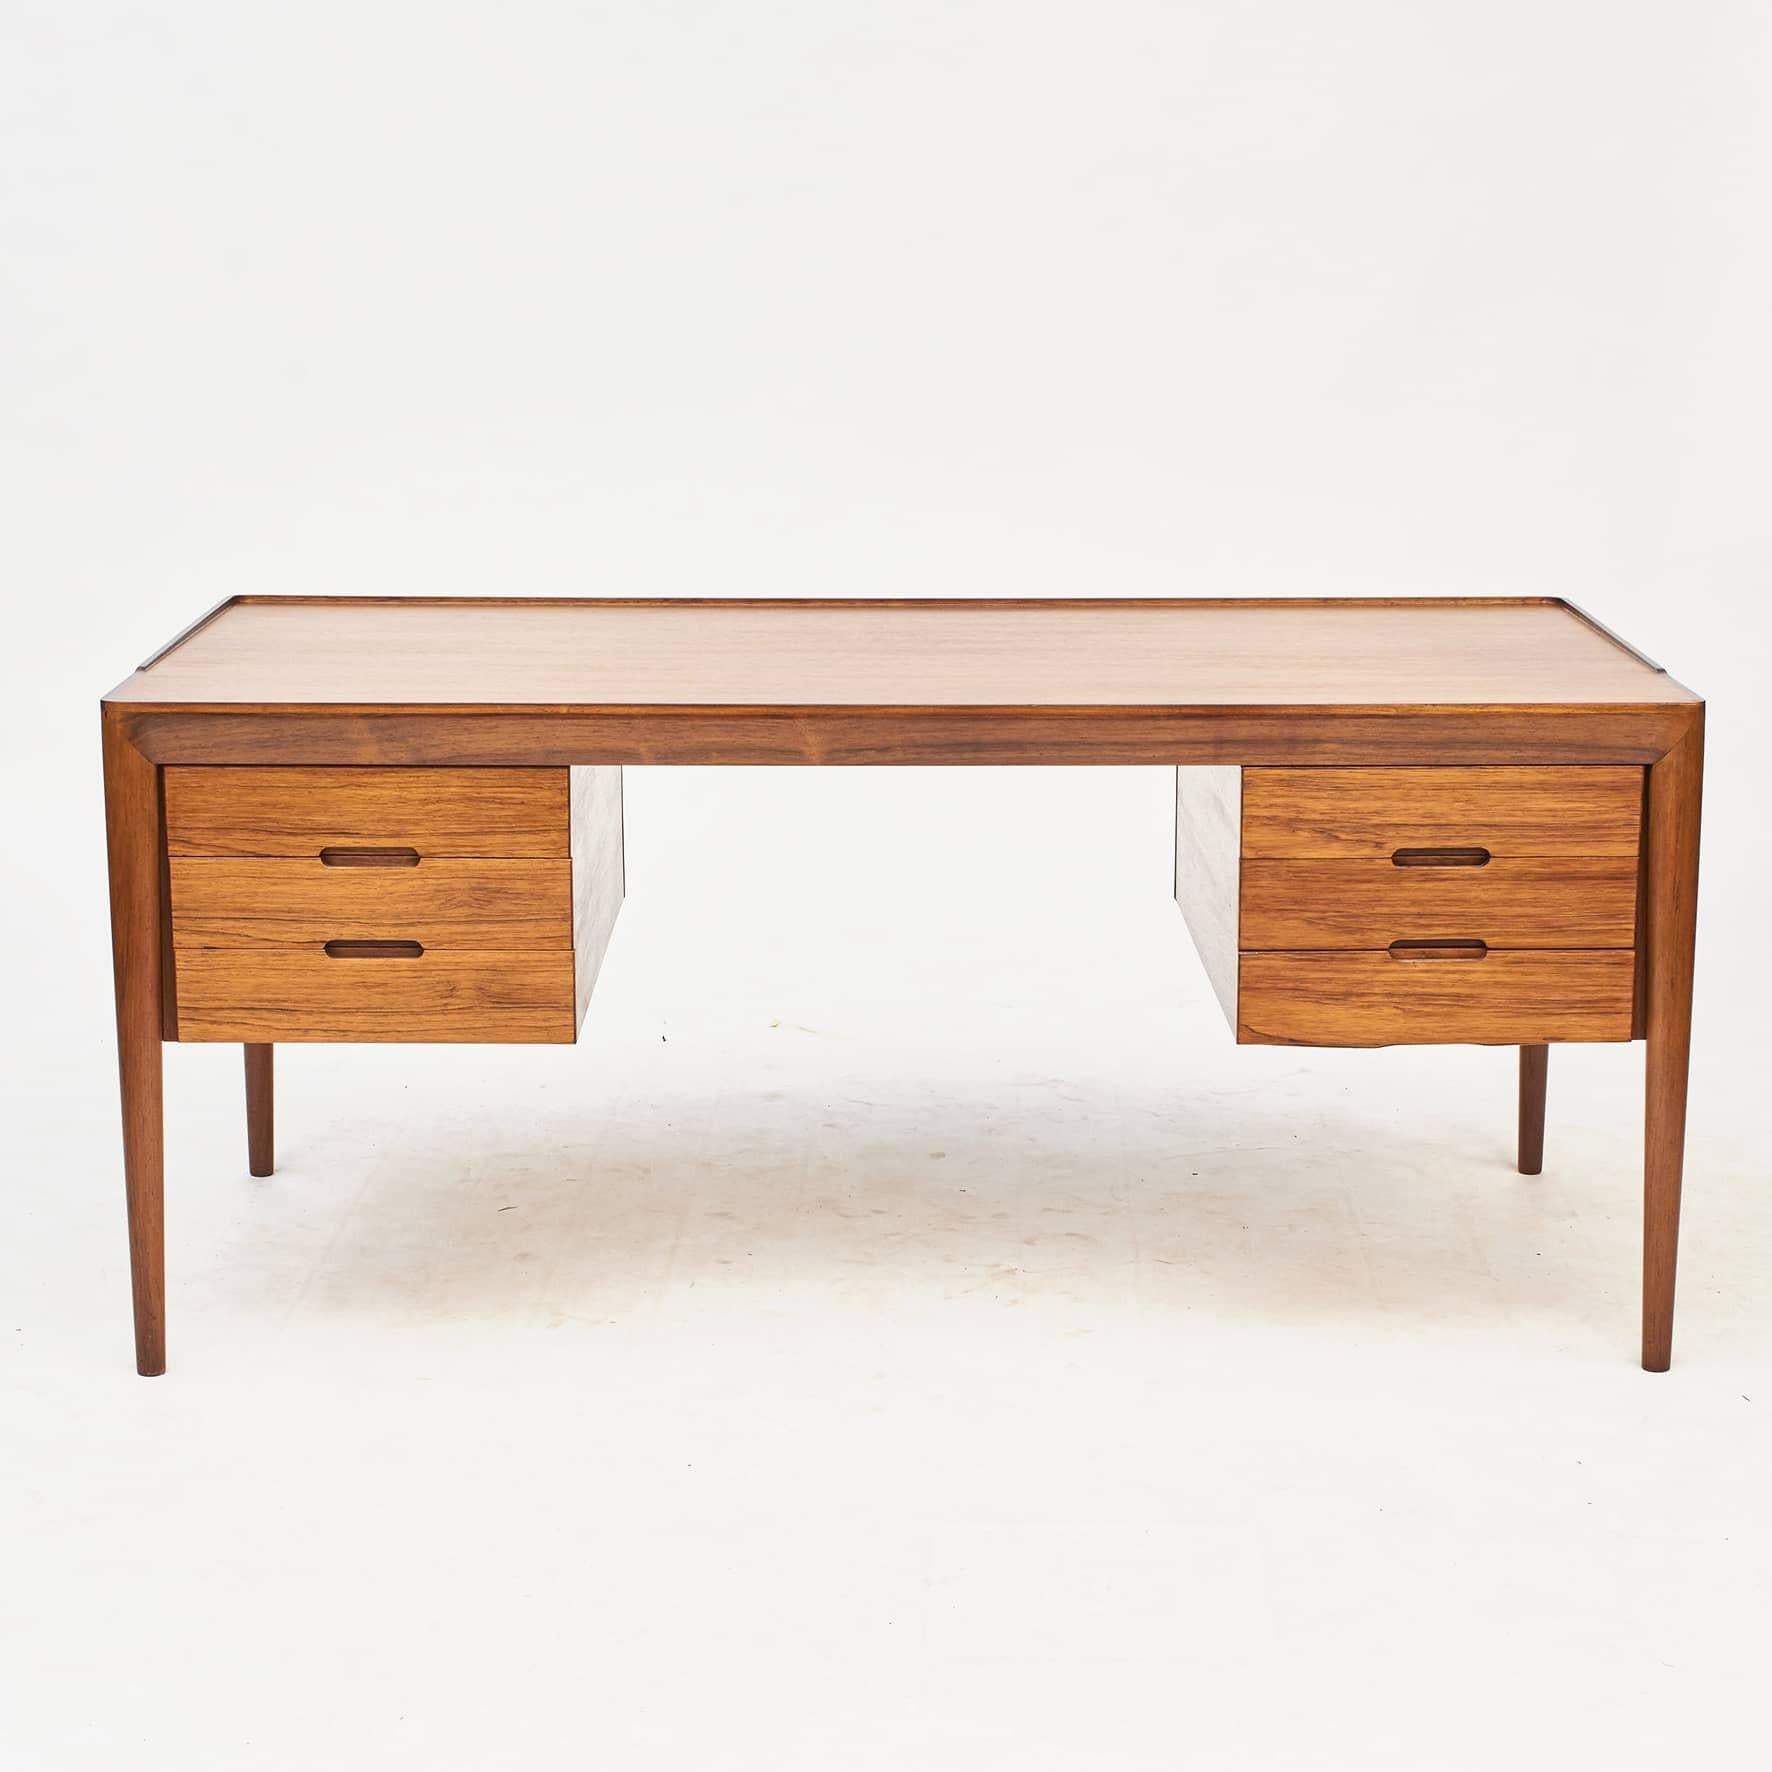 Freestanding Rosewood writing desk, model 66,
designed by Erik Riisager Hansen.
Tabletop with raised edge.
2x3 drawers with integrated pulls. Top drawers has sliding lids for use as extra workspace.
Round tapered legs.
Produced by Haslev